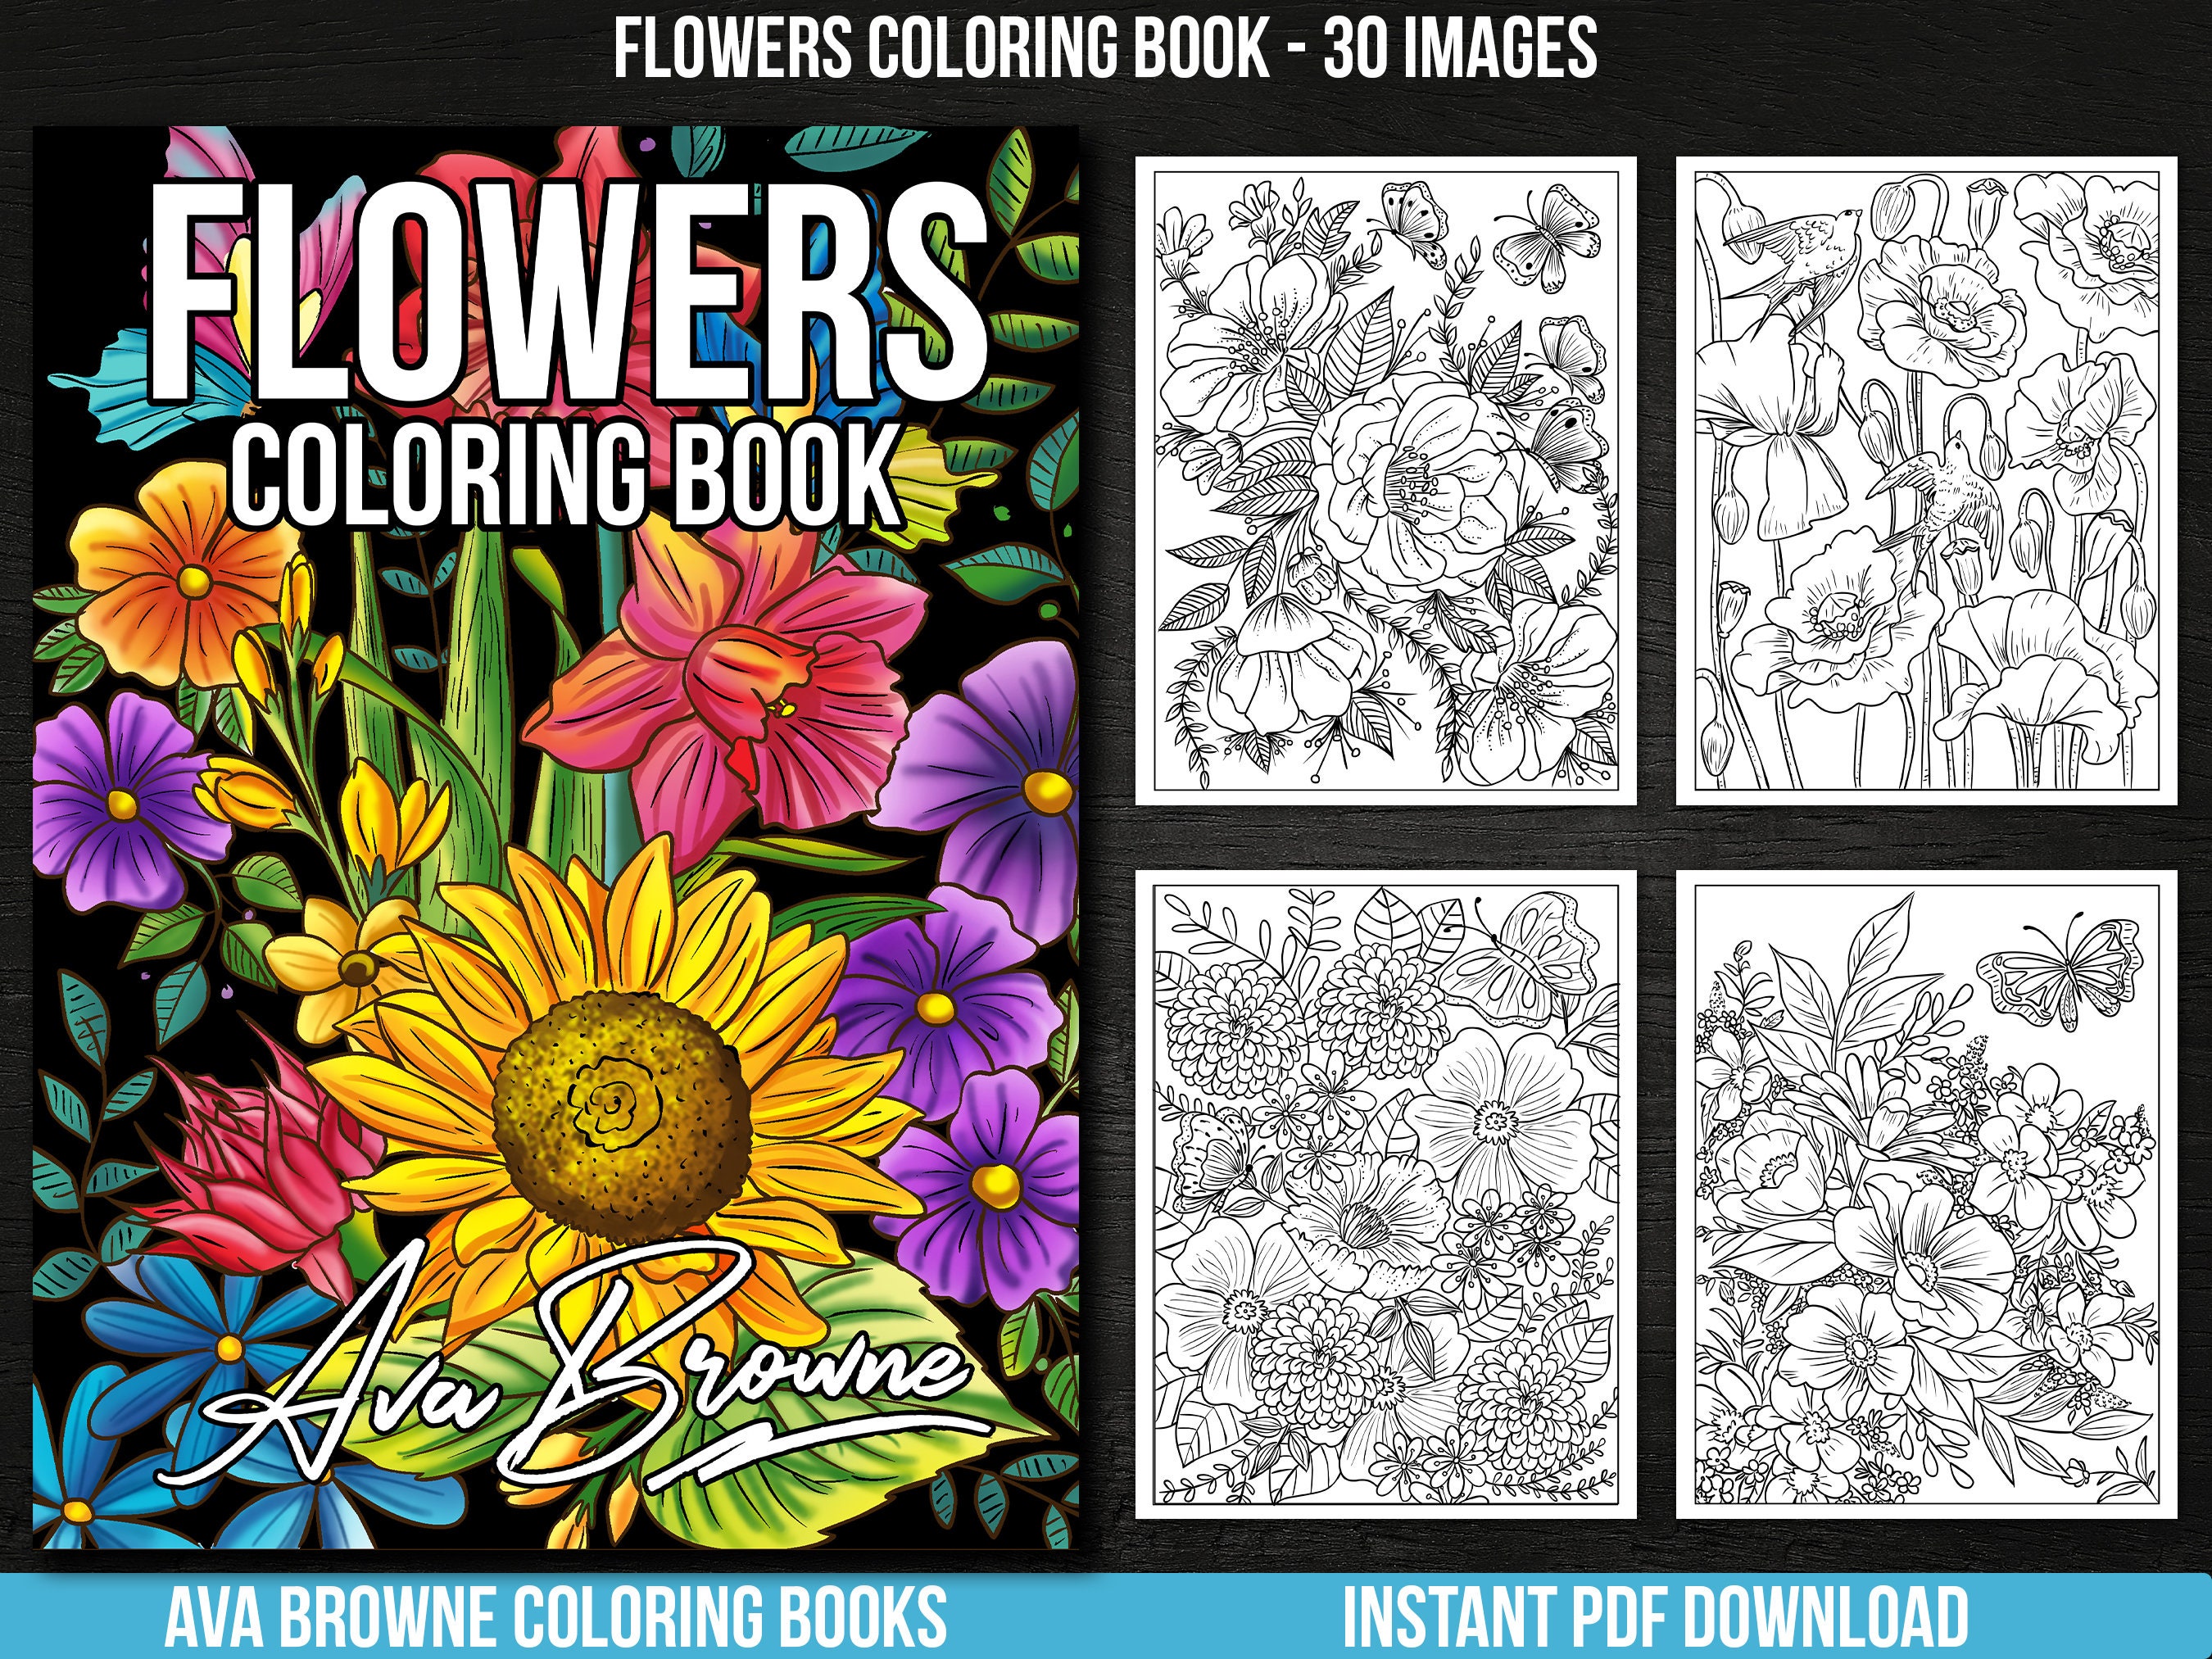 Ava Browne Coloring Books Flower Coloring Book Adult Etsy